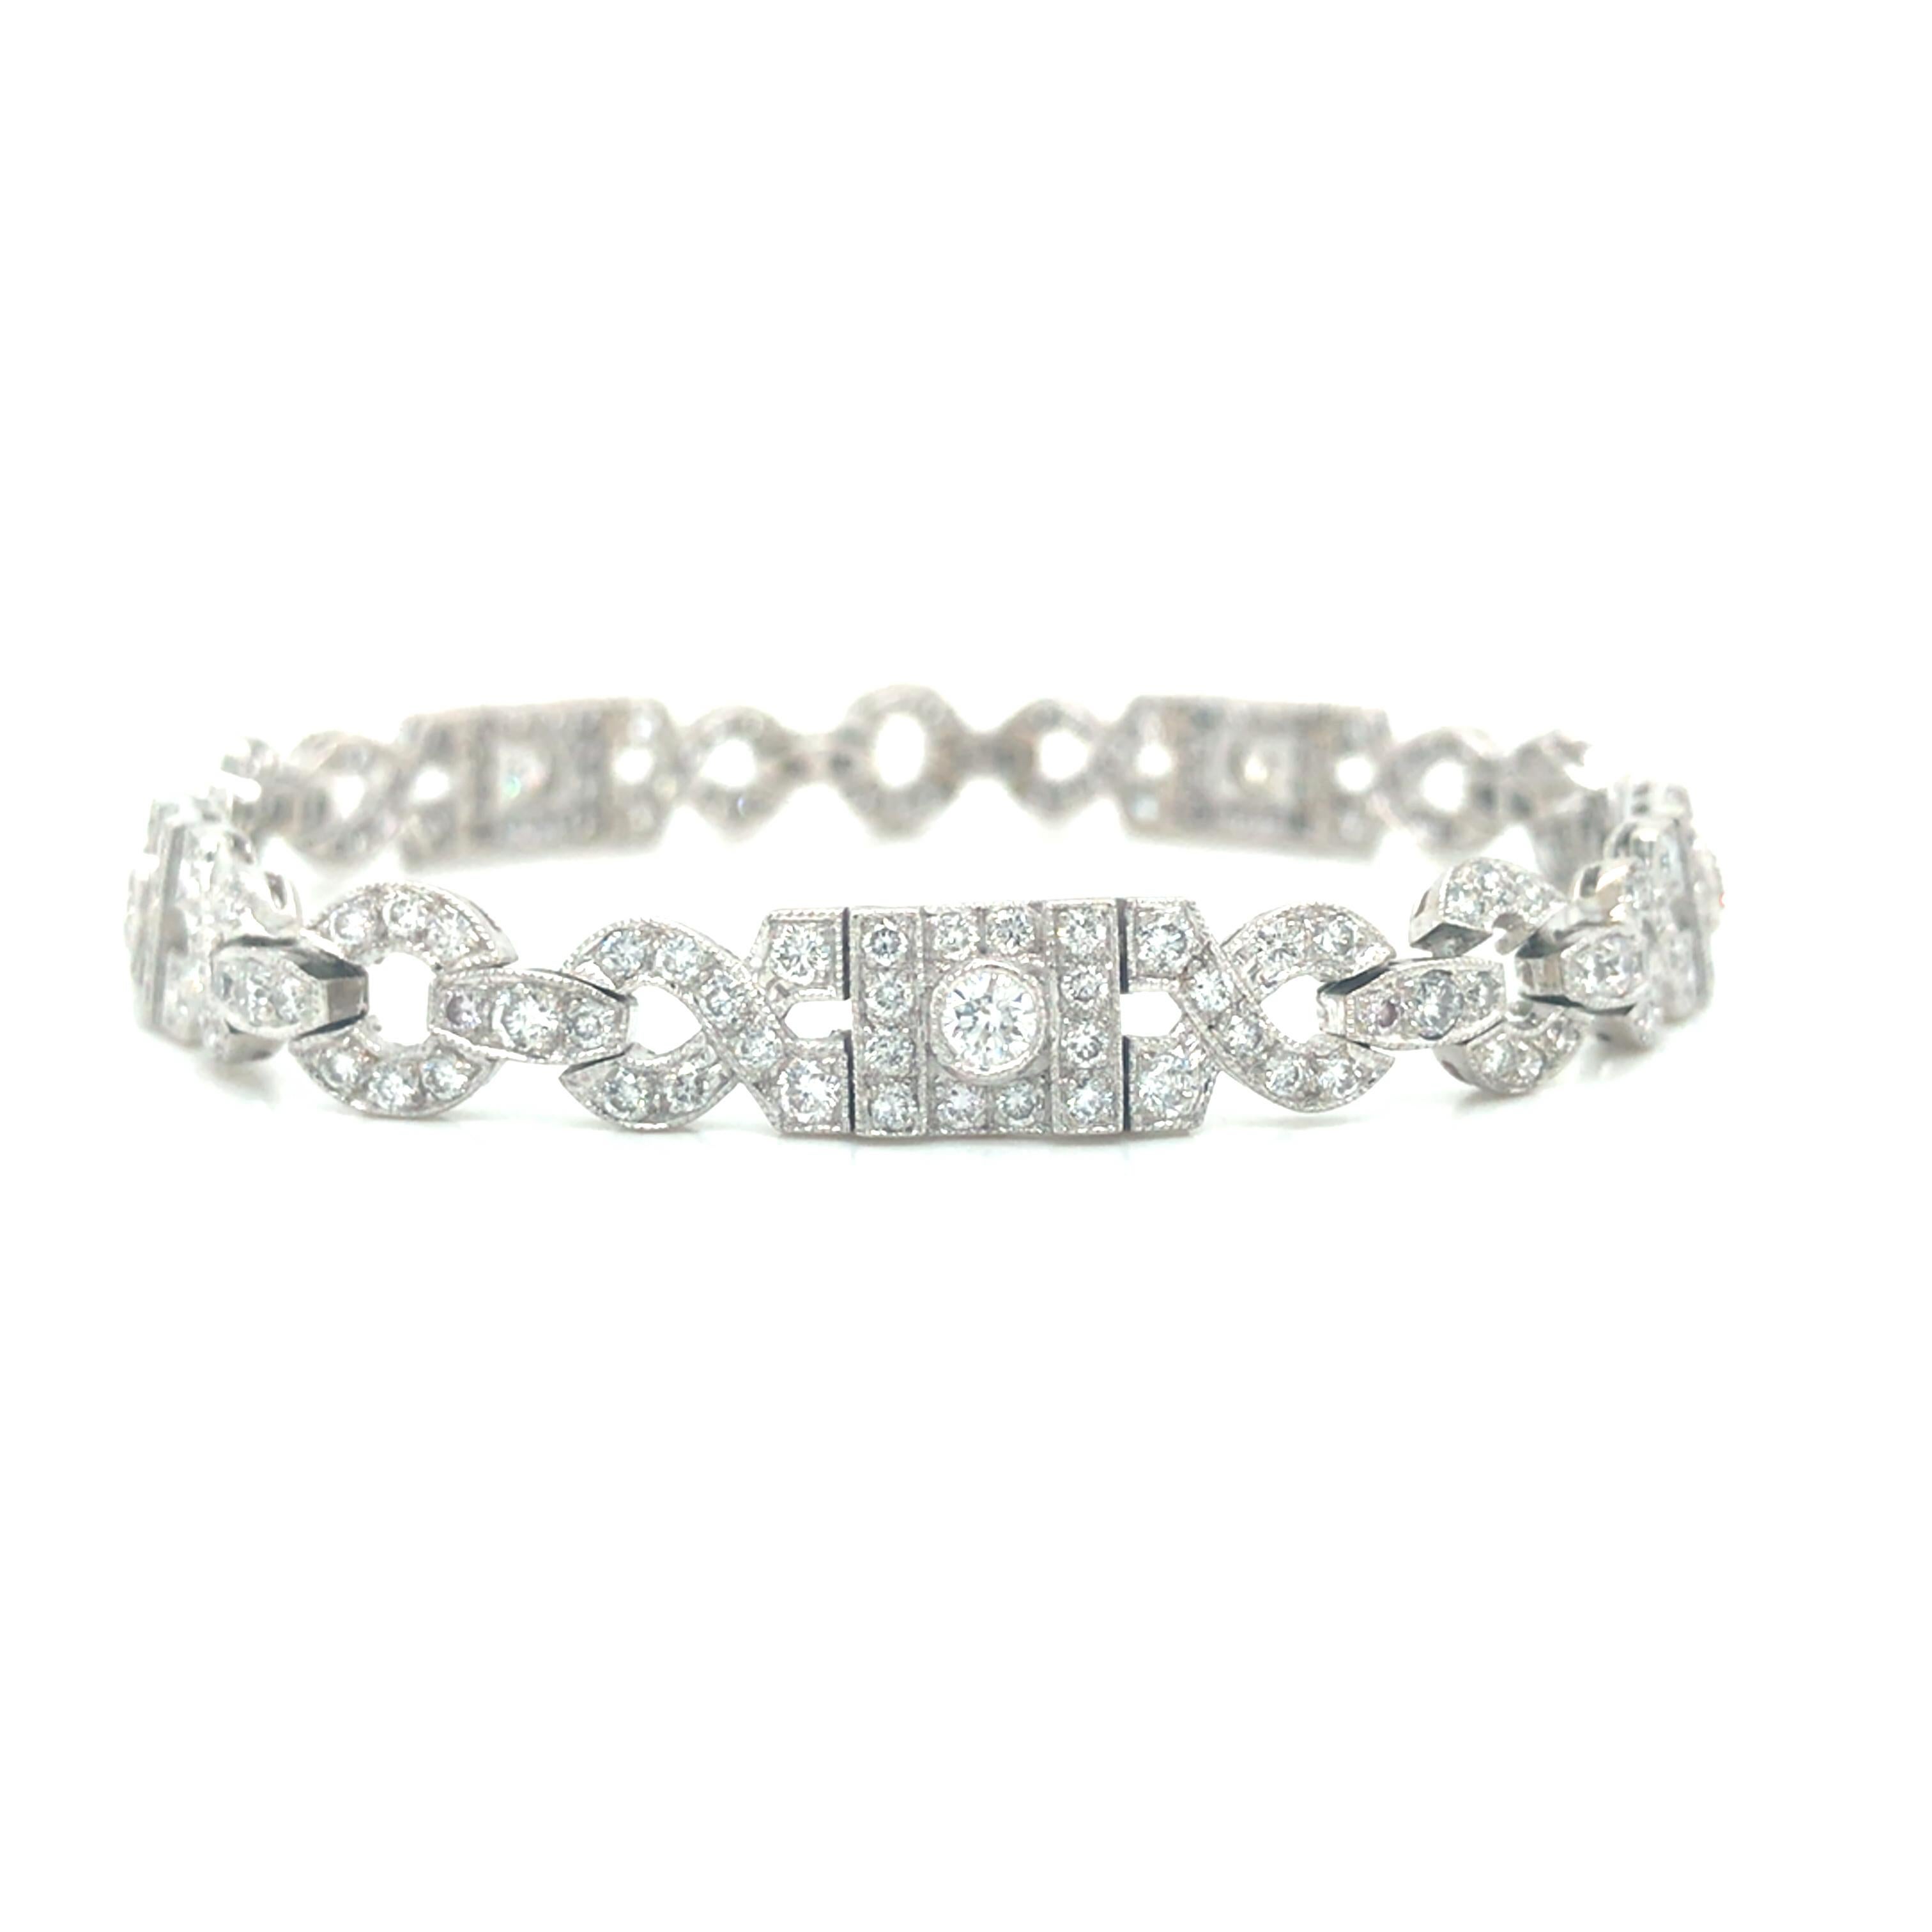 Art Deco Diamond Pave Geometric Bracelet in 18K White Gold.  235 Round Brilliant Cut Diamonds weighing 7.20 carat total weight, G-H in color and VS-SI in clarity are expertly set.  The Bracelet measures 7 1/4 inch in length and 5/16 inch in width. 